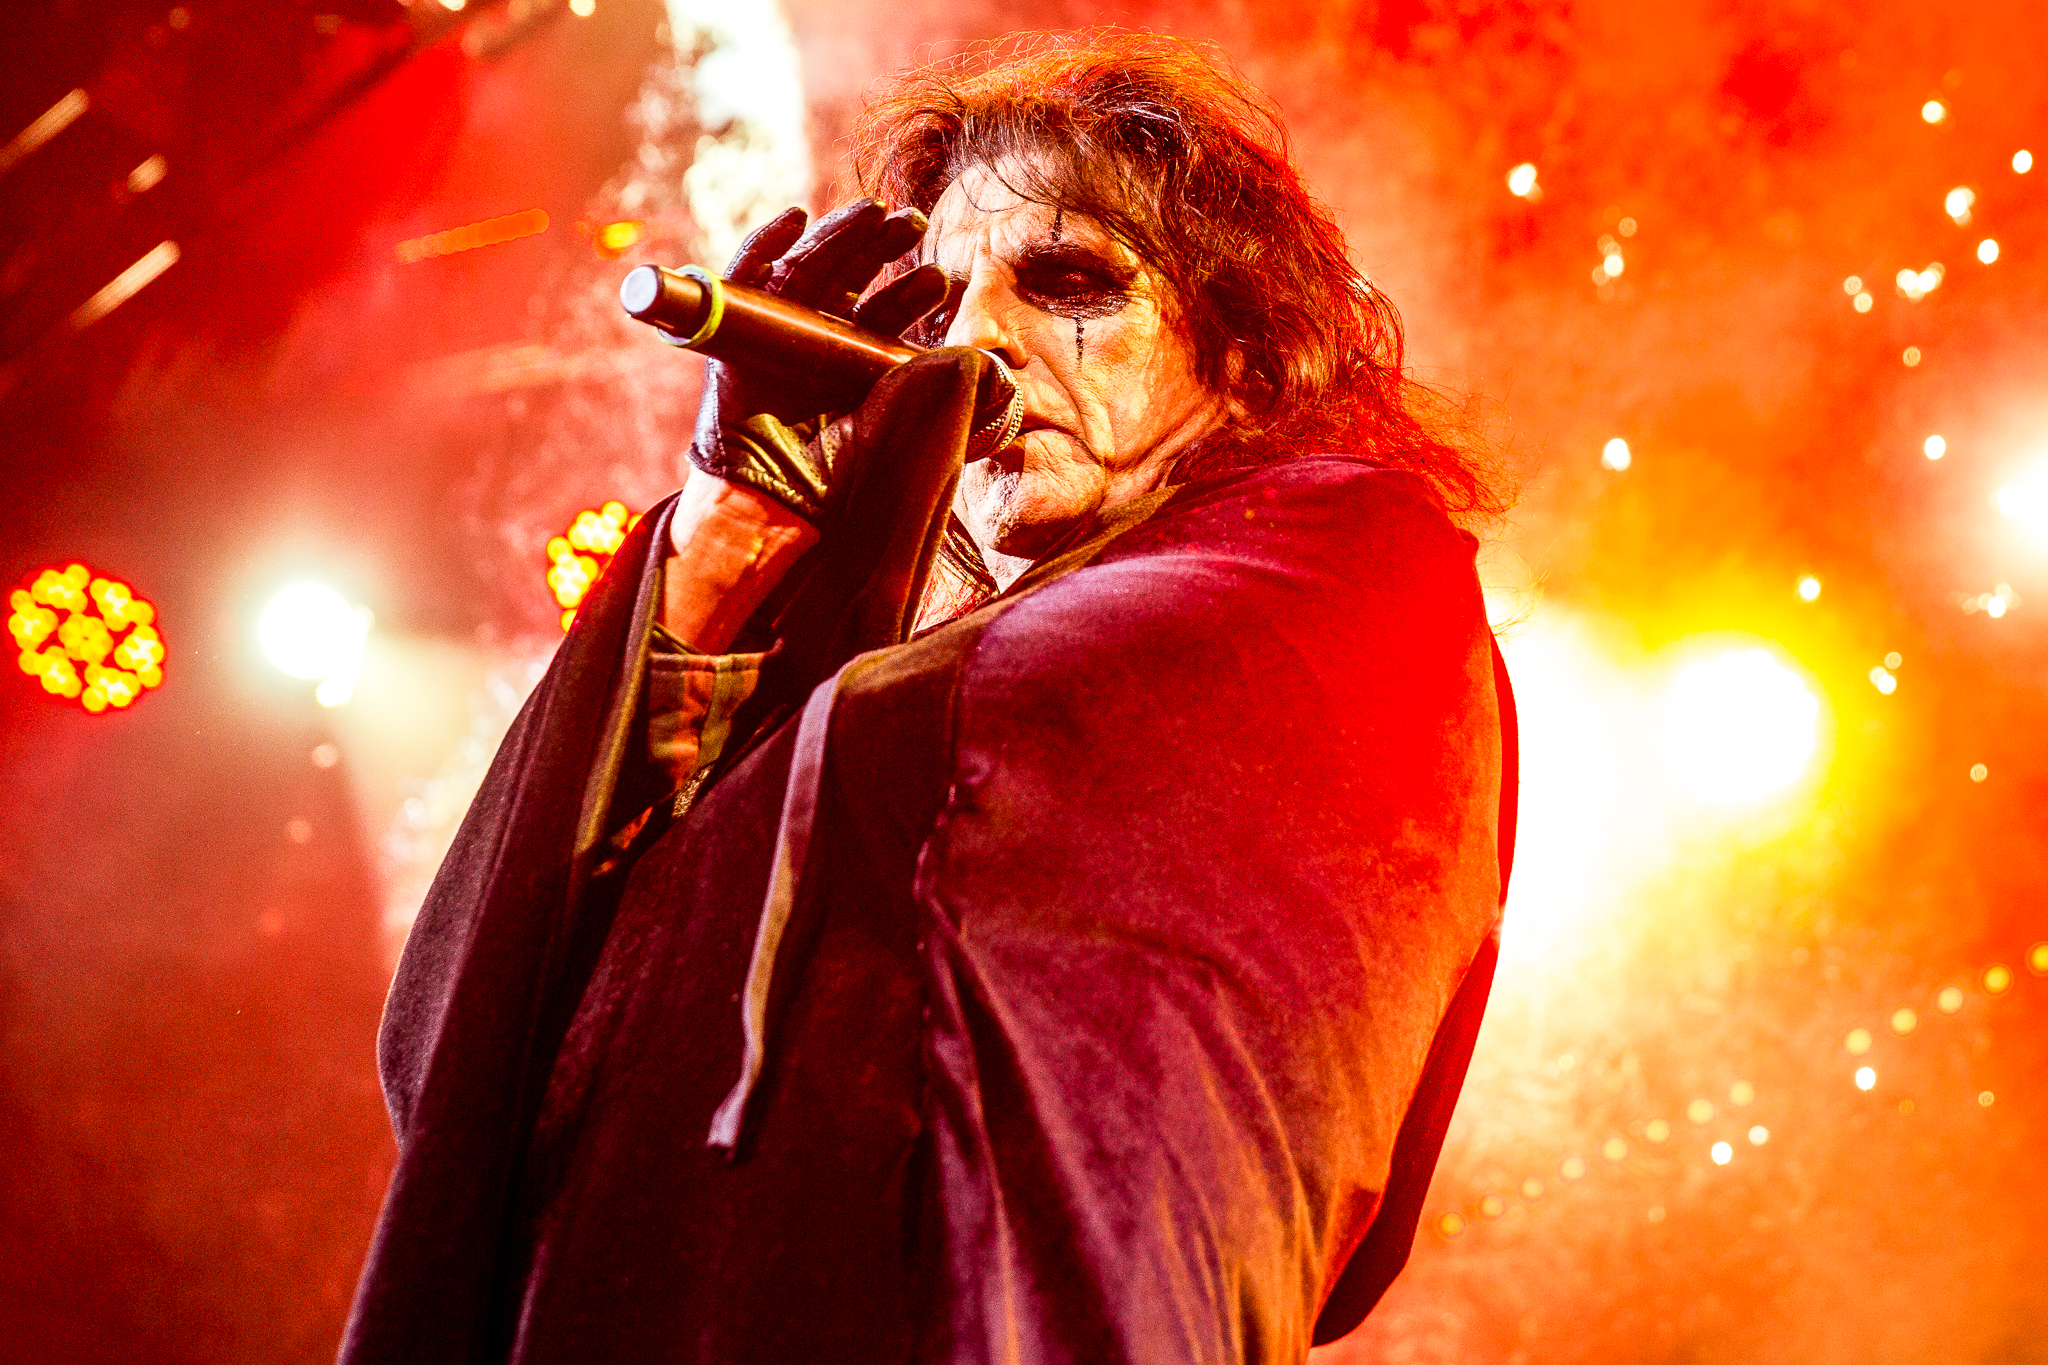 Alice Cooper, Halestorm Announce Co-Headlining Tour With Motionless In White